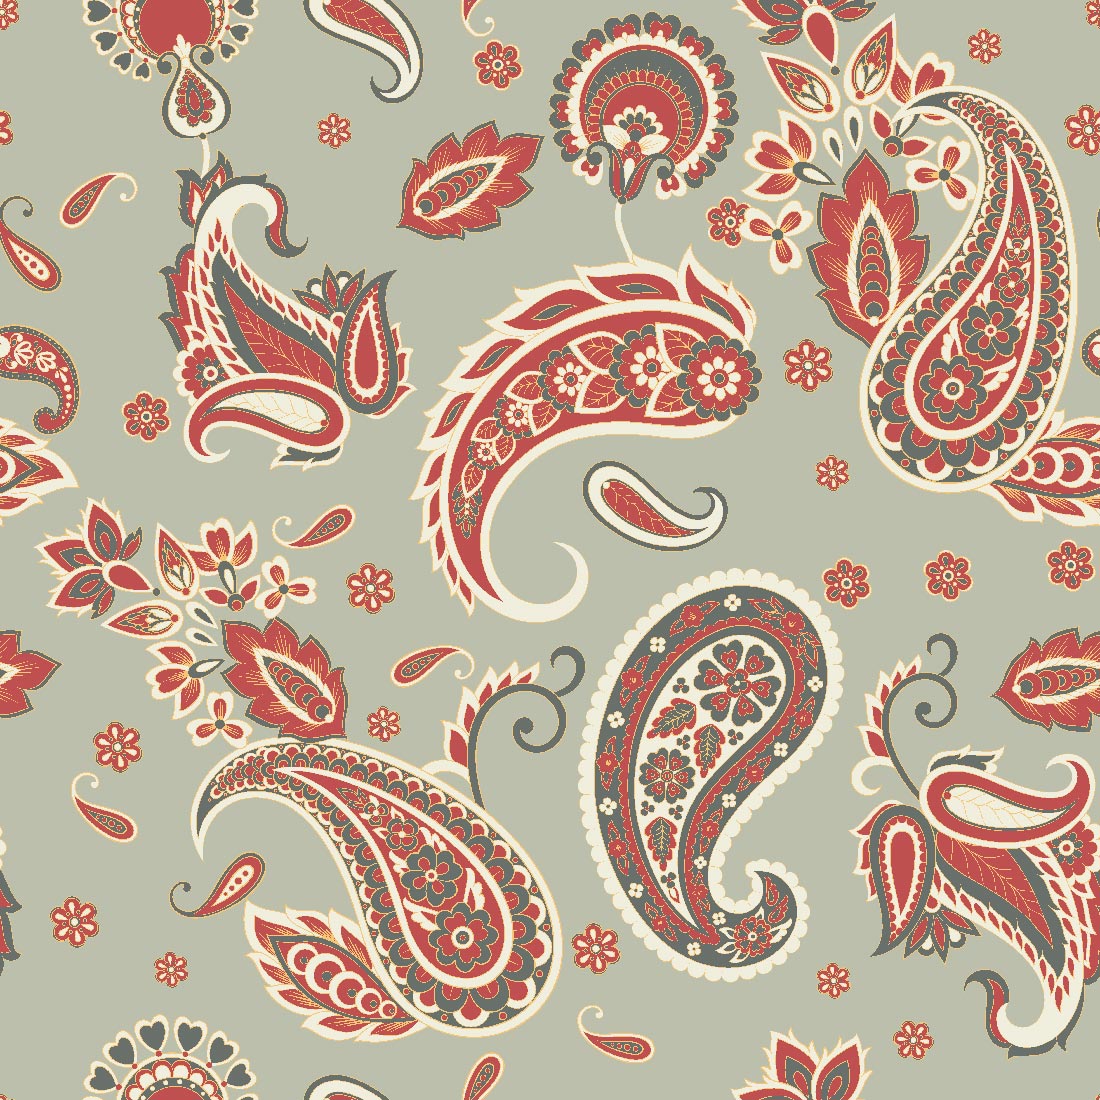 6 Paisly Seamless Vector Pattern cover image.